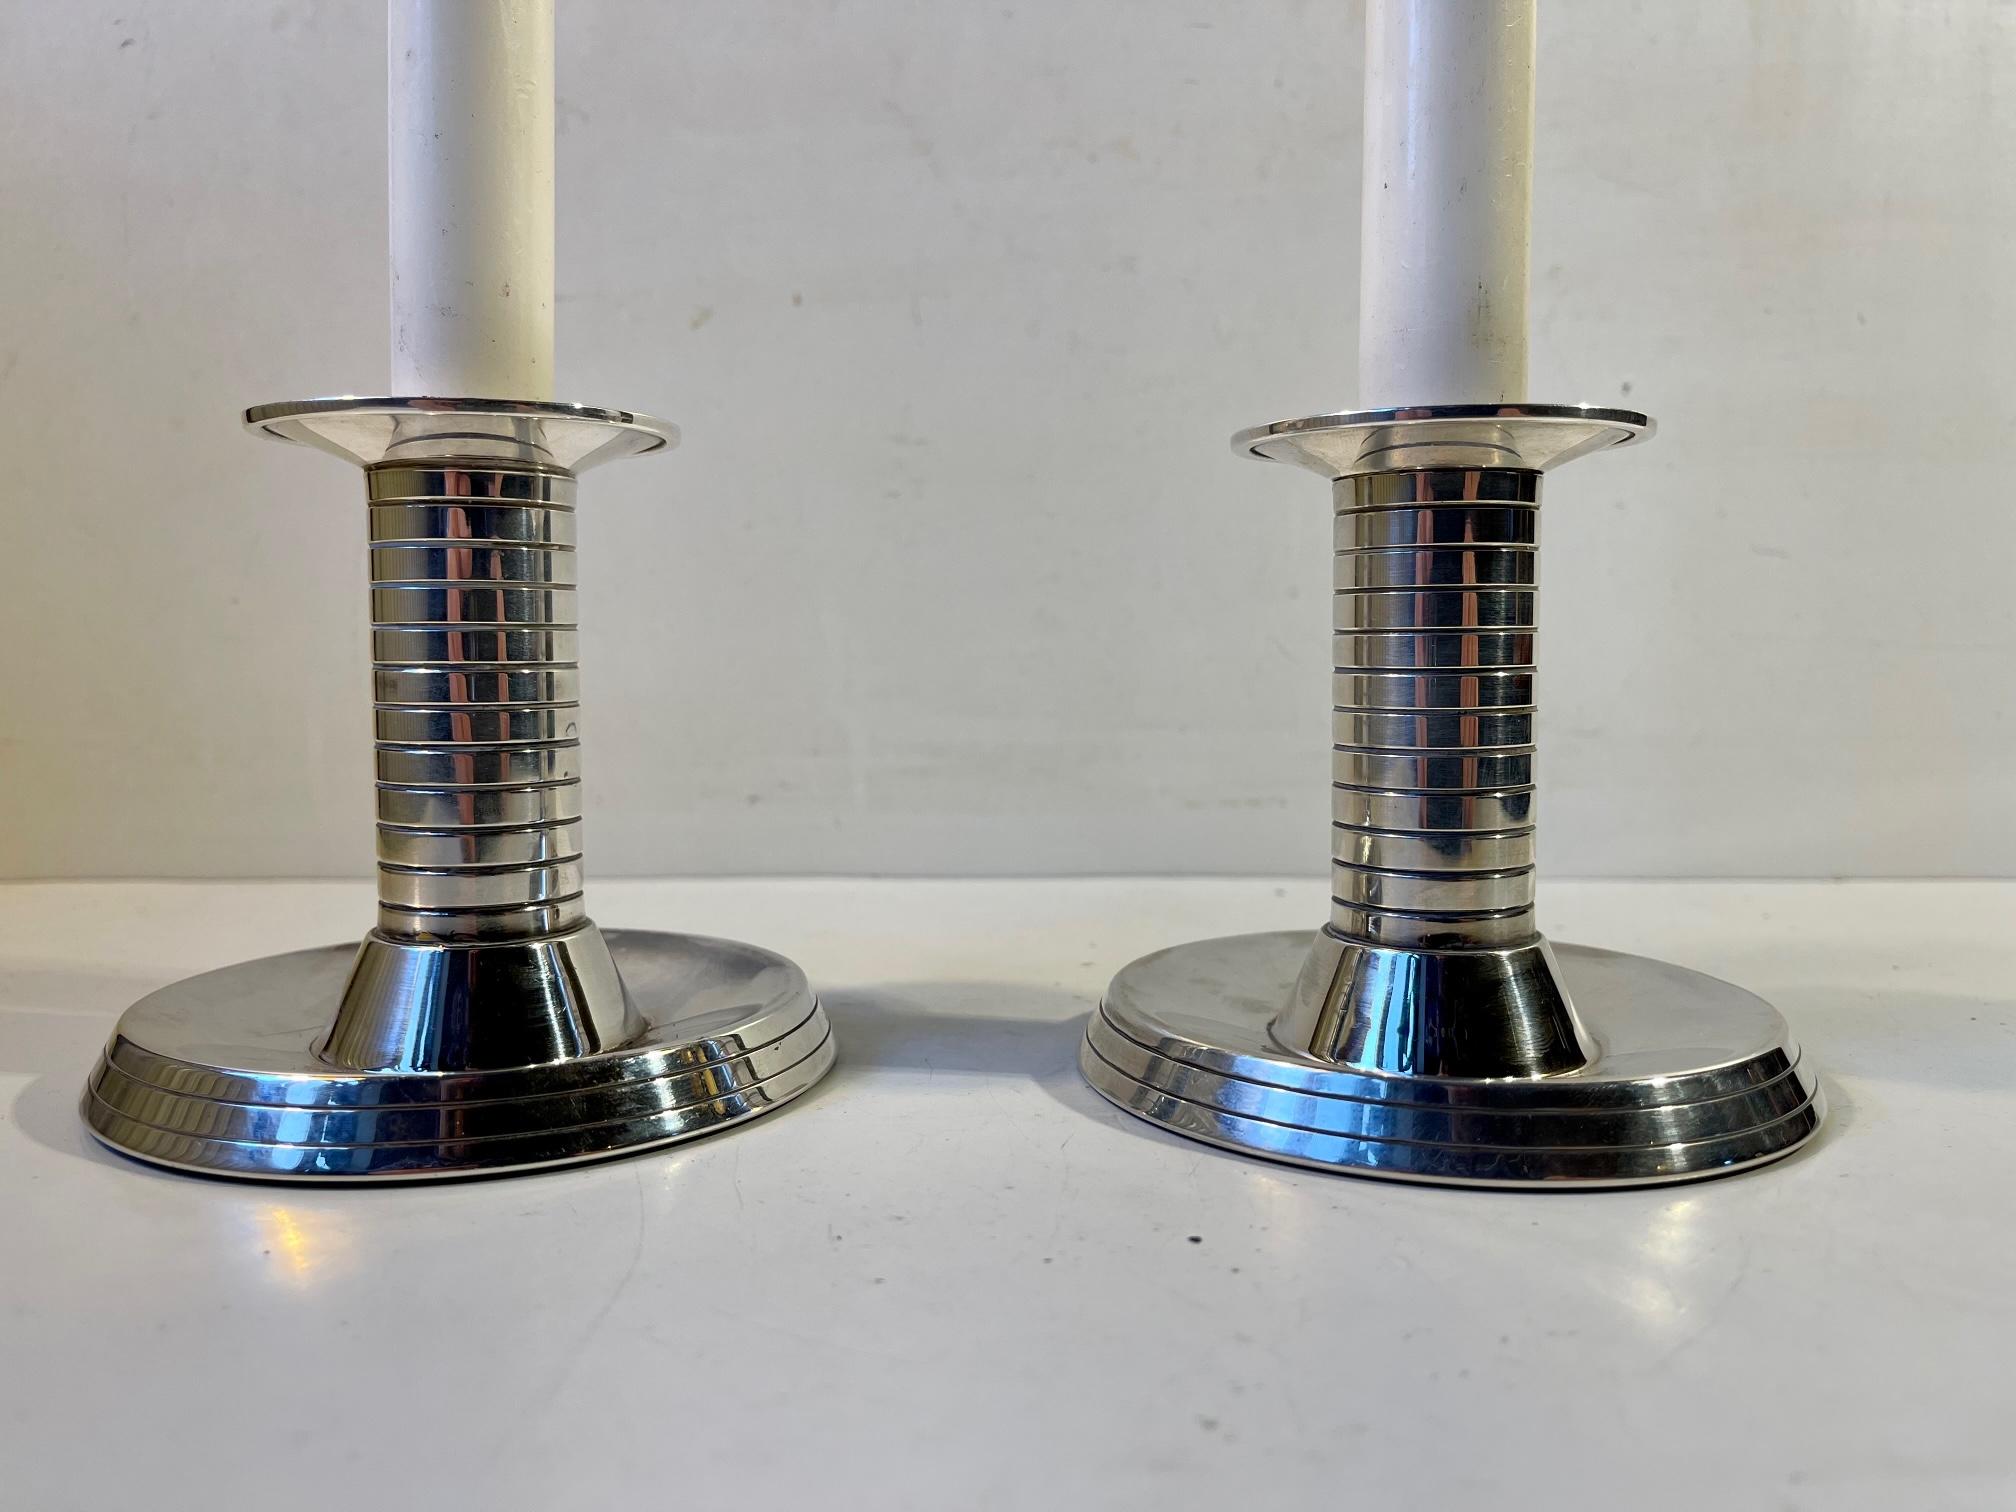 Danish Art Deco Candlesticks in Plated Silver from Carl F. Christensen, 1920s For Sale